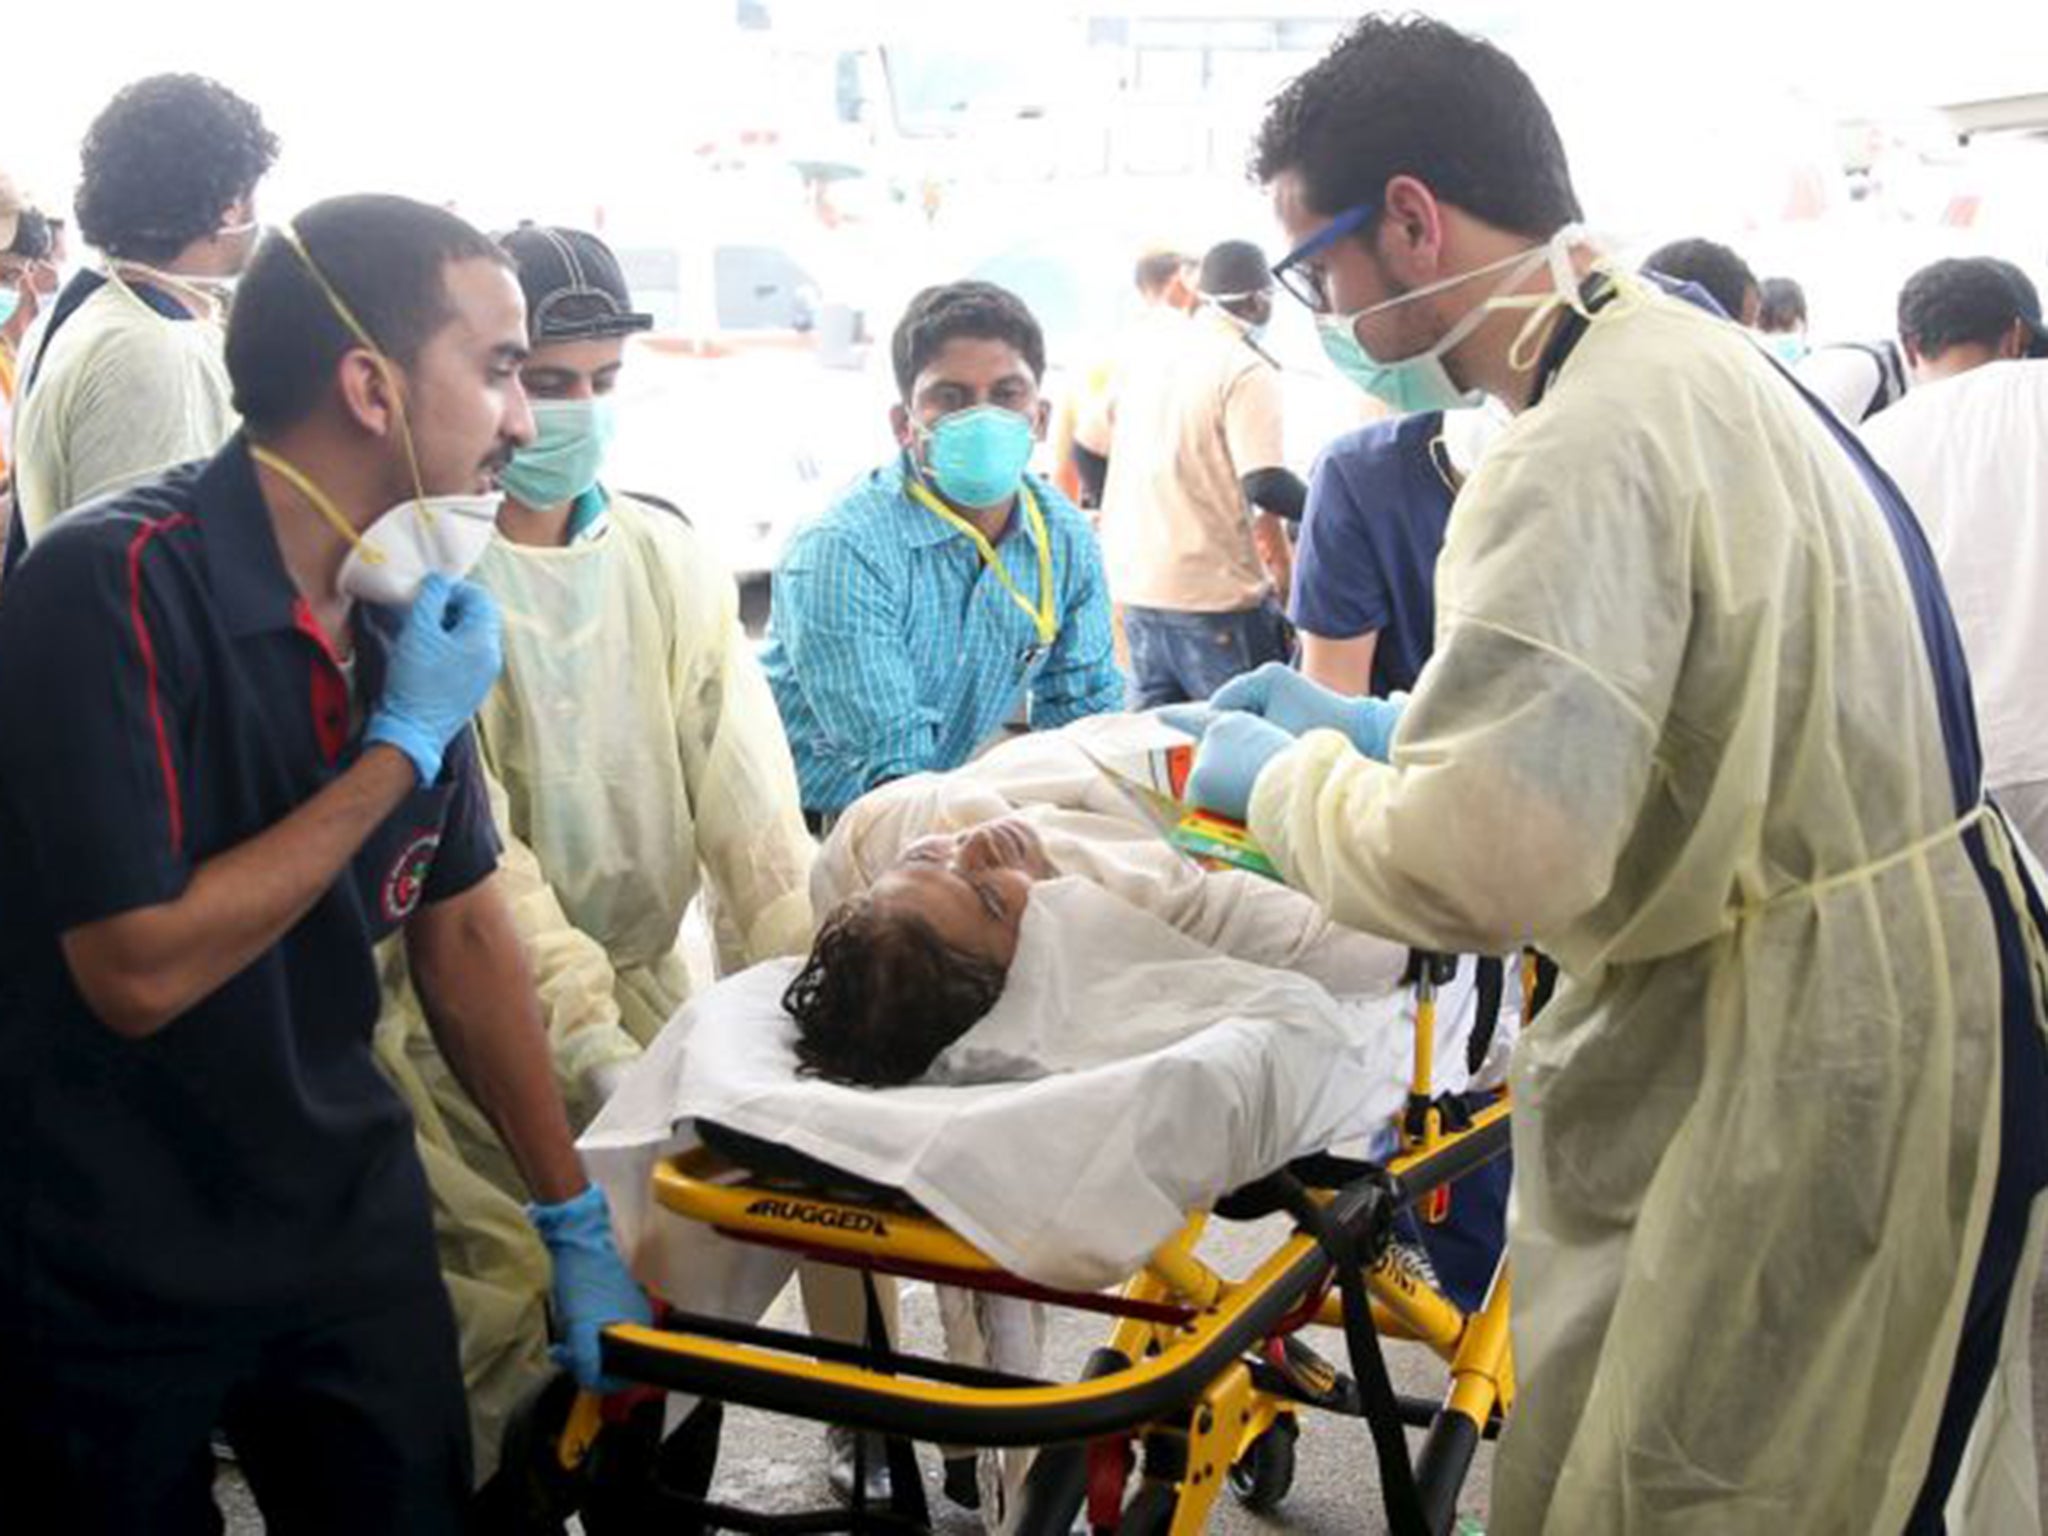 Fatima Bibi Bodi is taken to hospital on 24 September following a crush at Mina that left at least 769 people dead